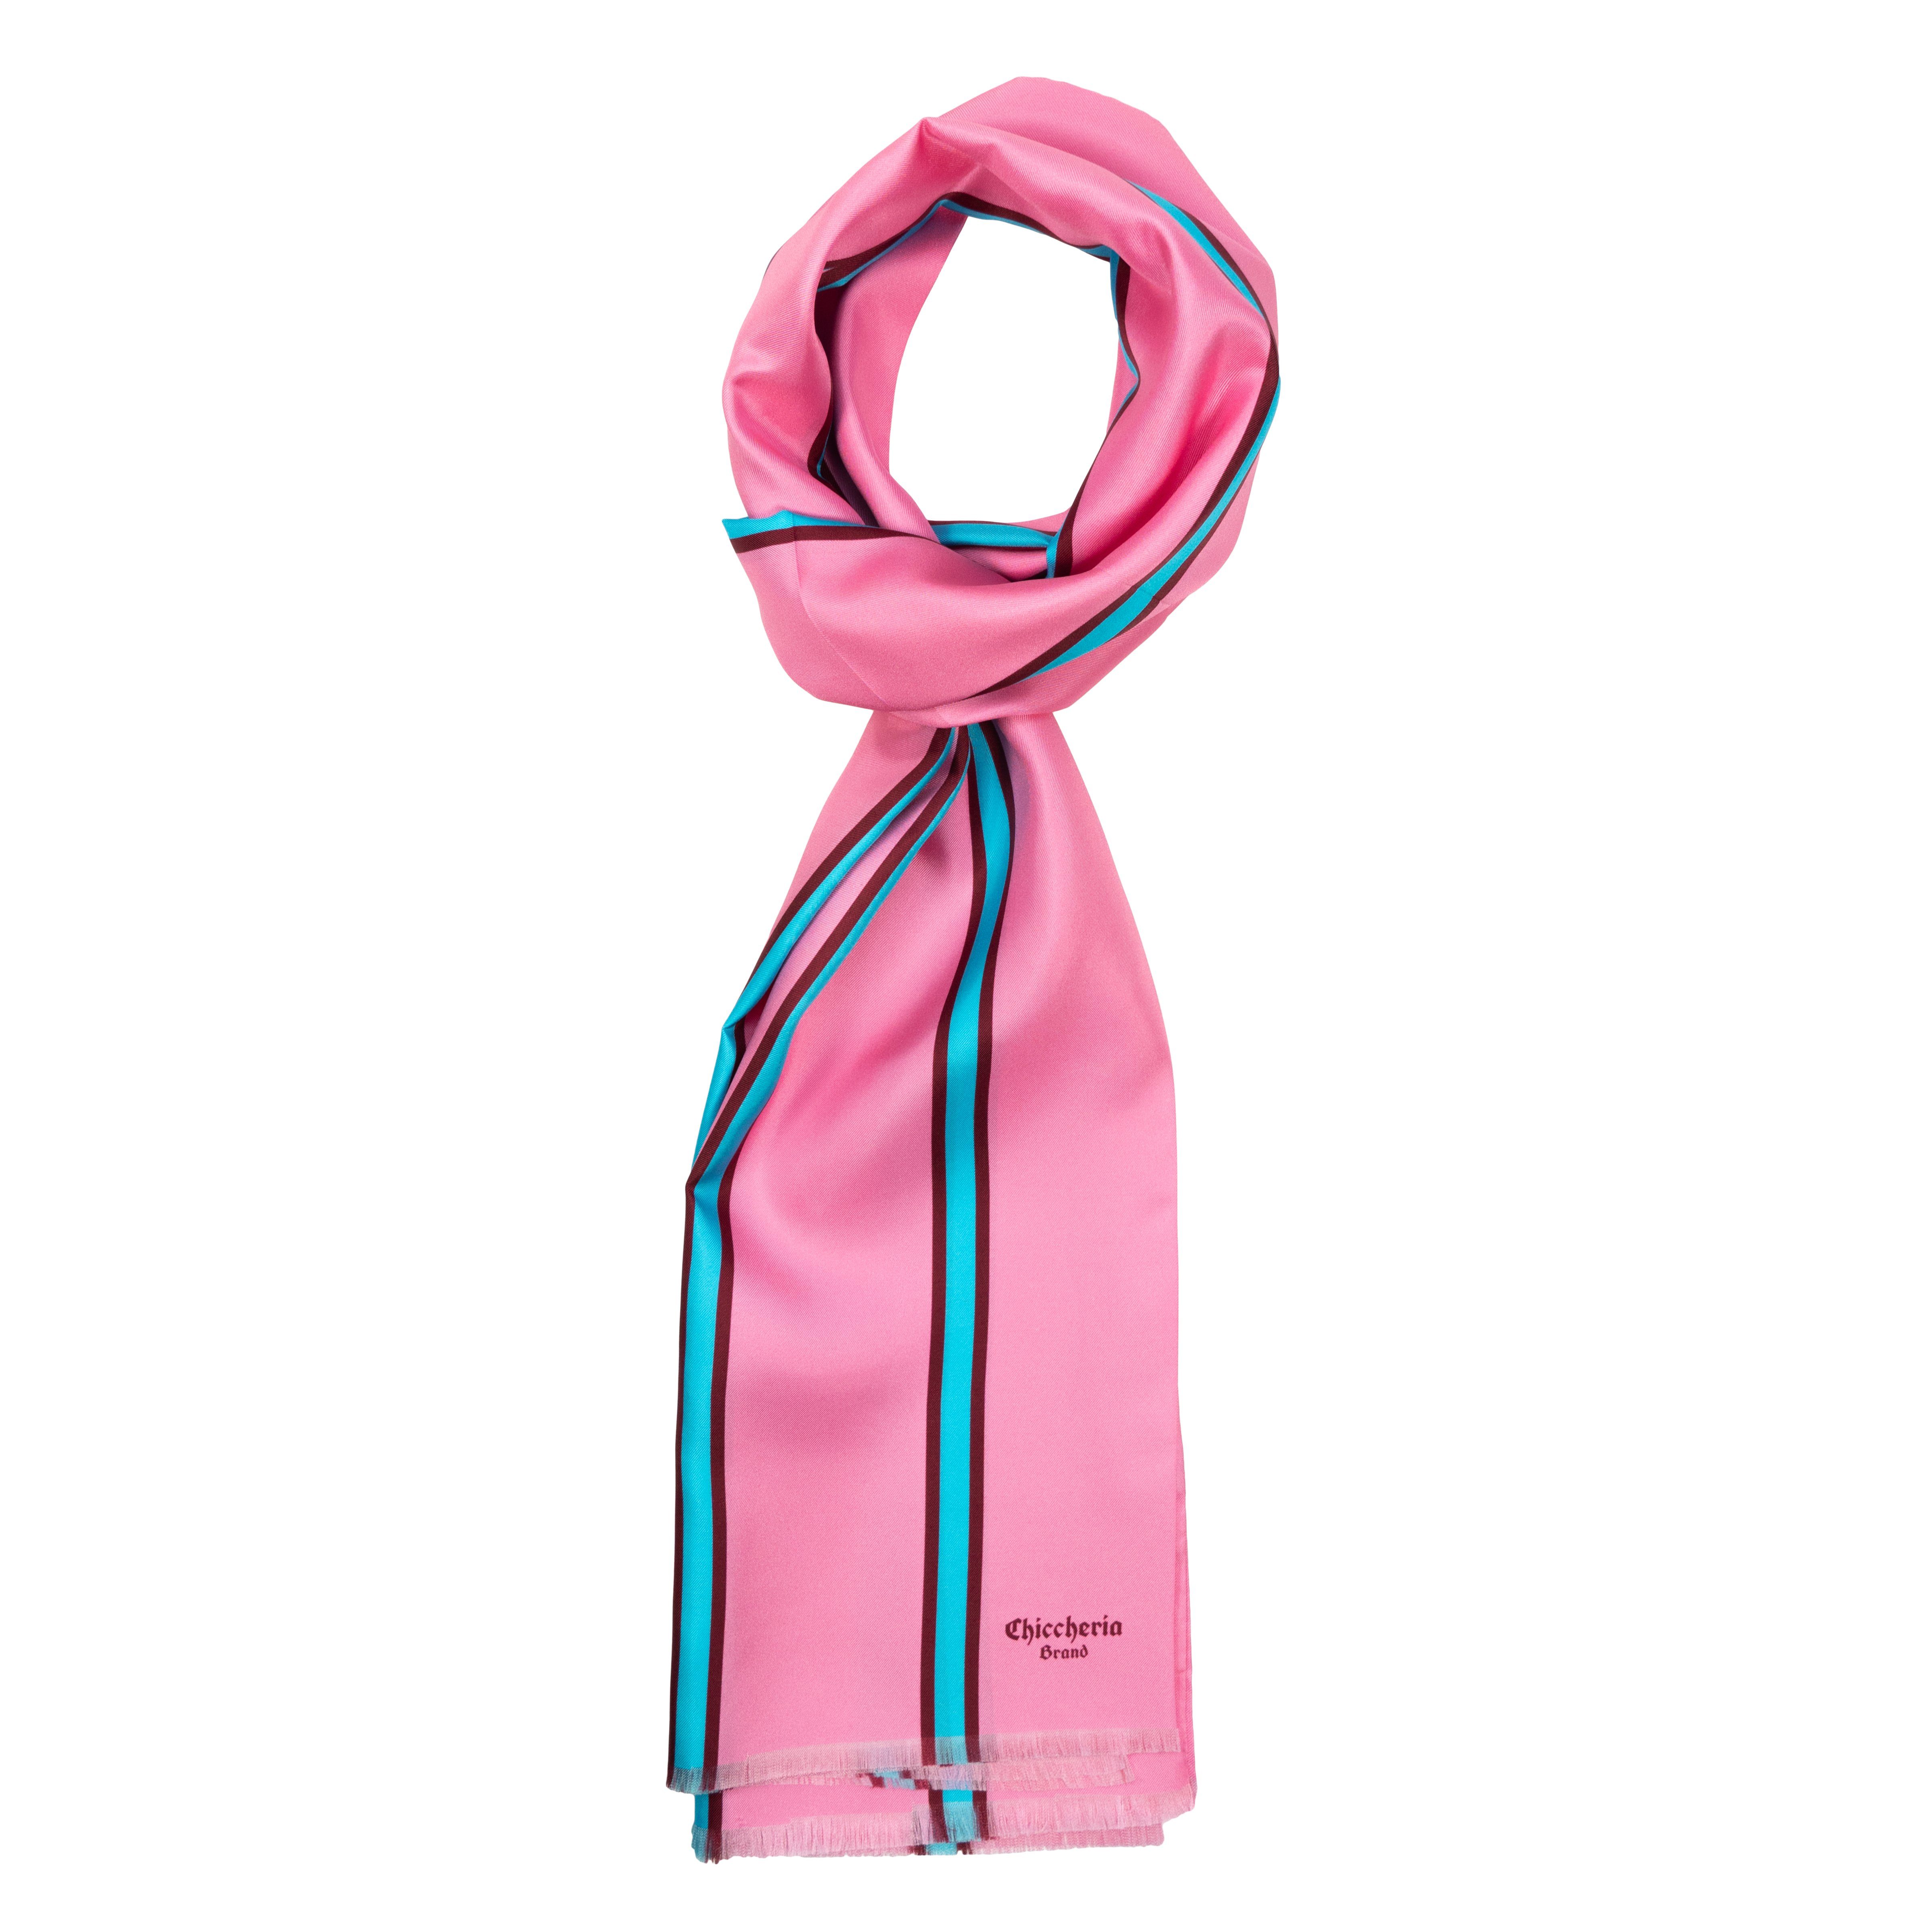 Chiccheria Brand Italy Seidenschal in STRIPES, Rosa COLOR Made